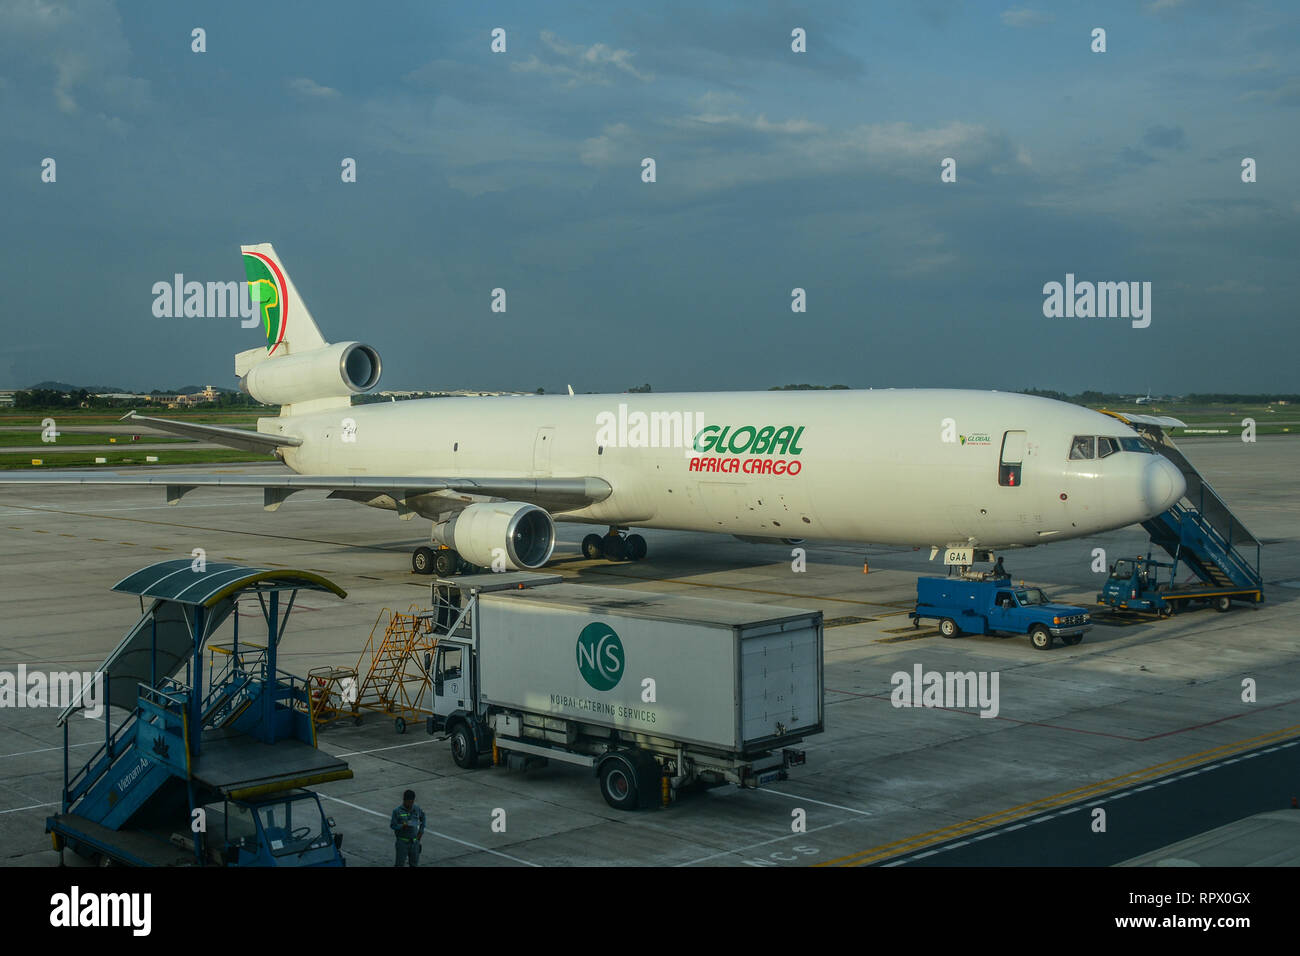 Hanoi, Vietnam - Aug 21, 2016. A McDonnell Douglas MD-11F airplane of Global Africa Cargo docking at Noi Bai Airport (HAN). Stock Photo